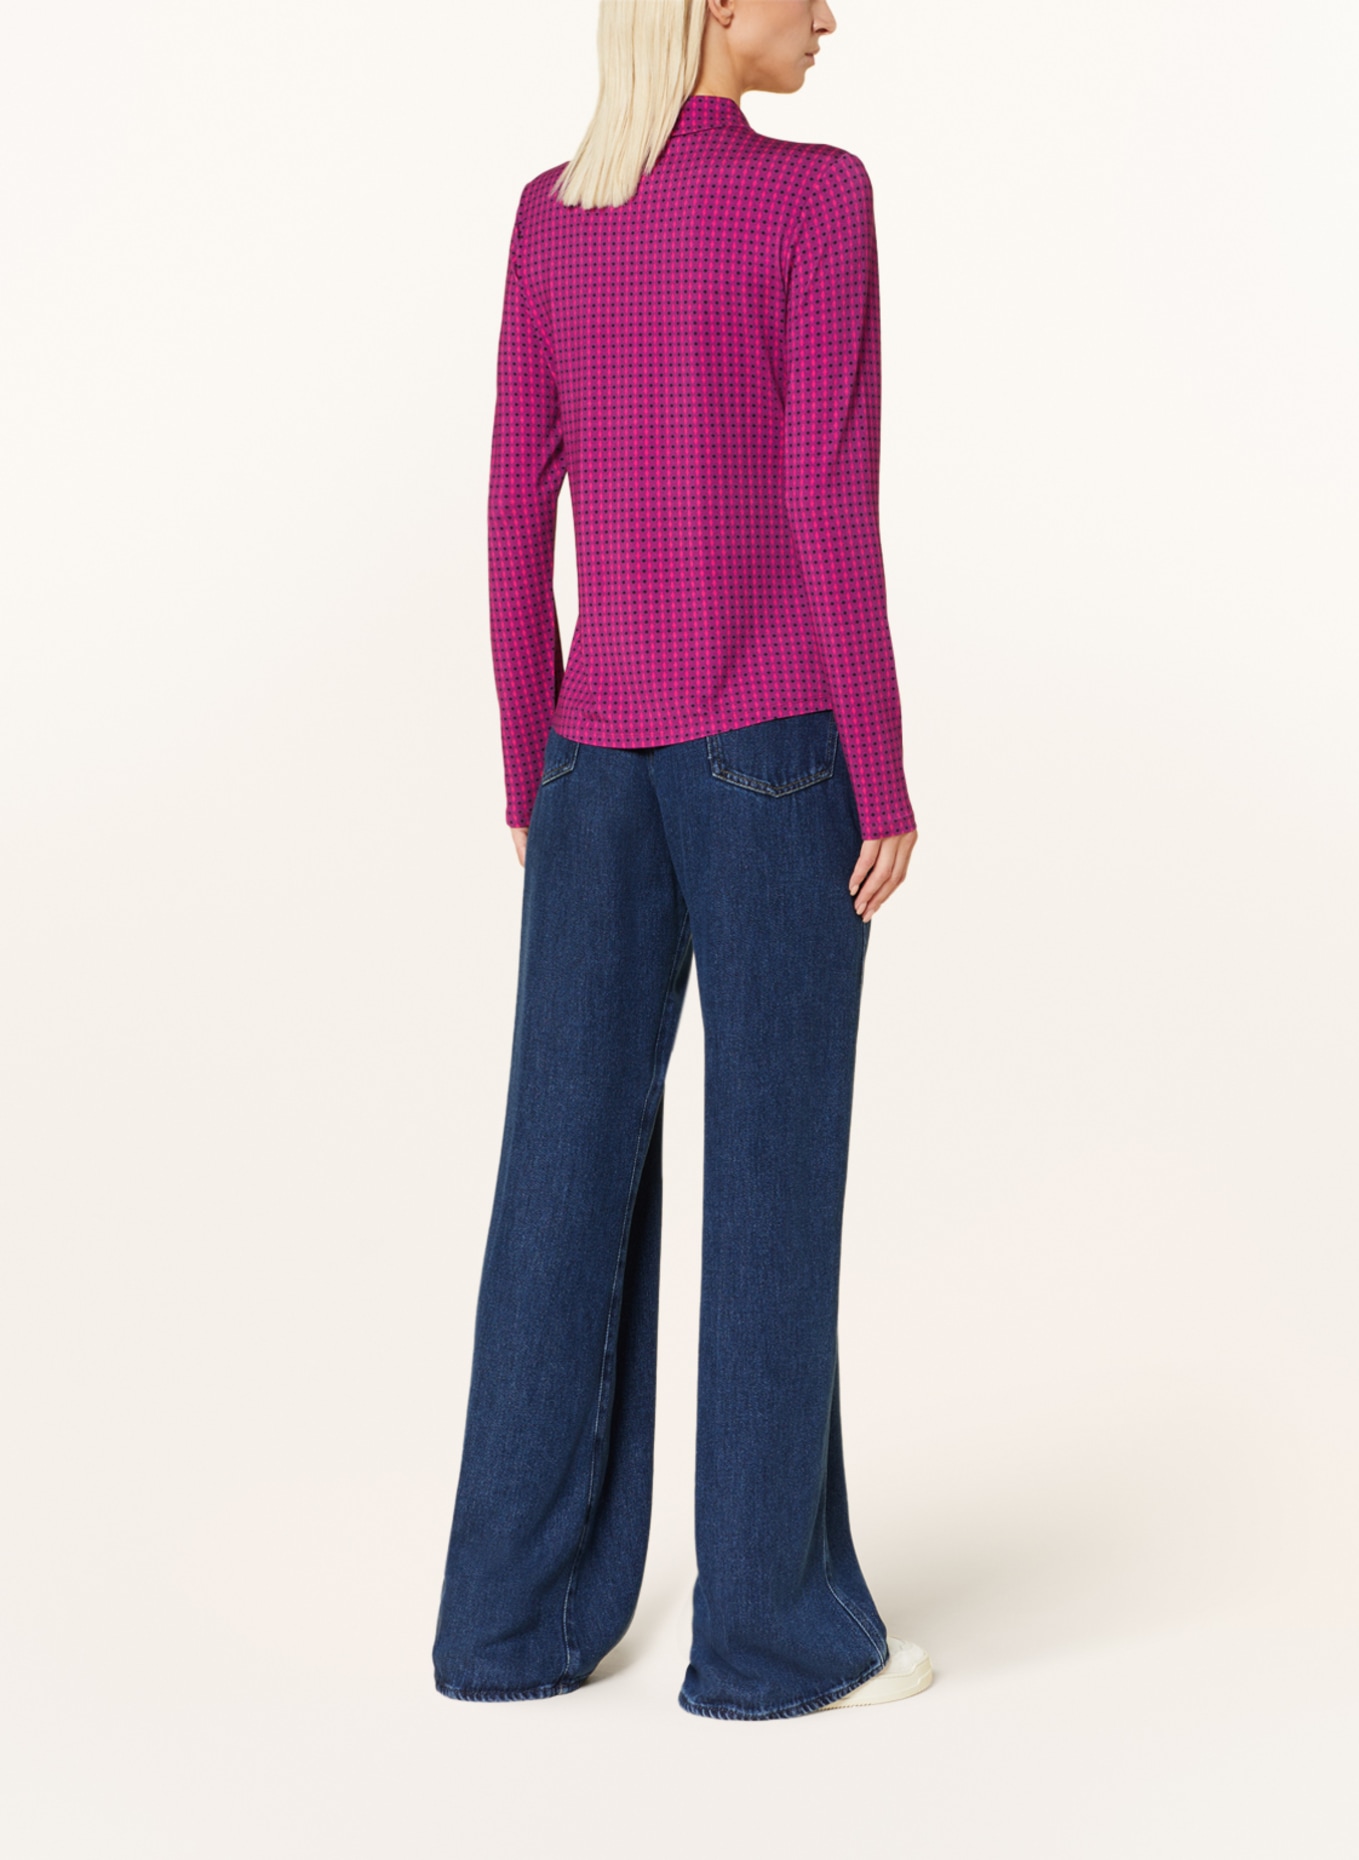 Marc O'Polo Shirt blouse made of jersey, Color: PINK/ BLACK/ FUCHSIA (Image 3)